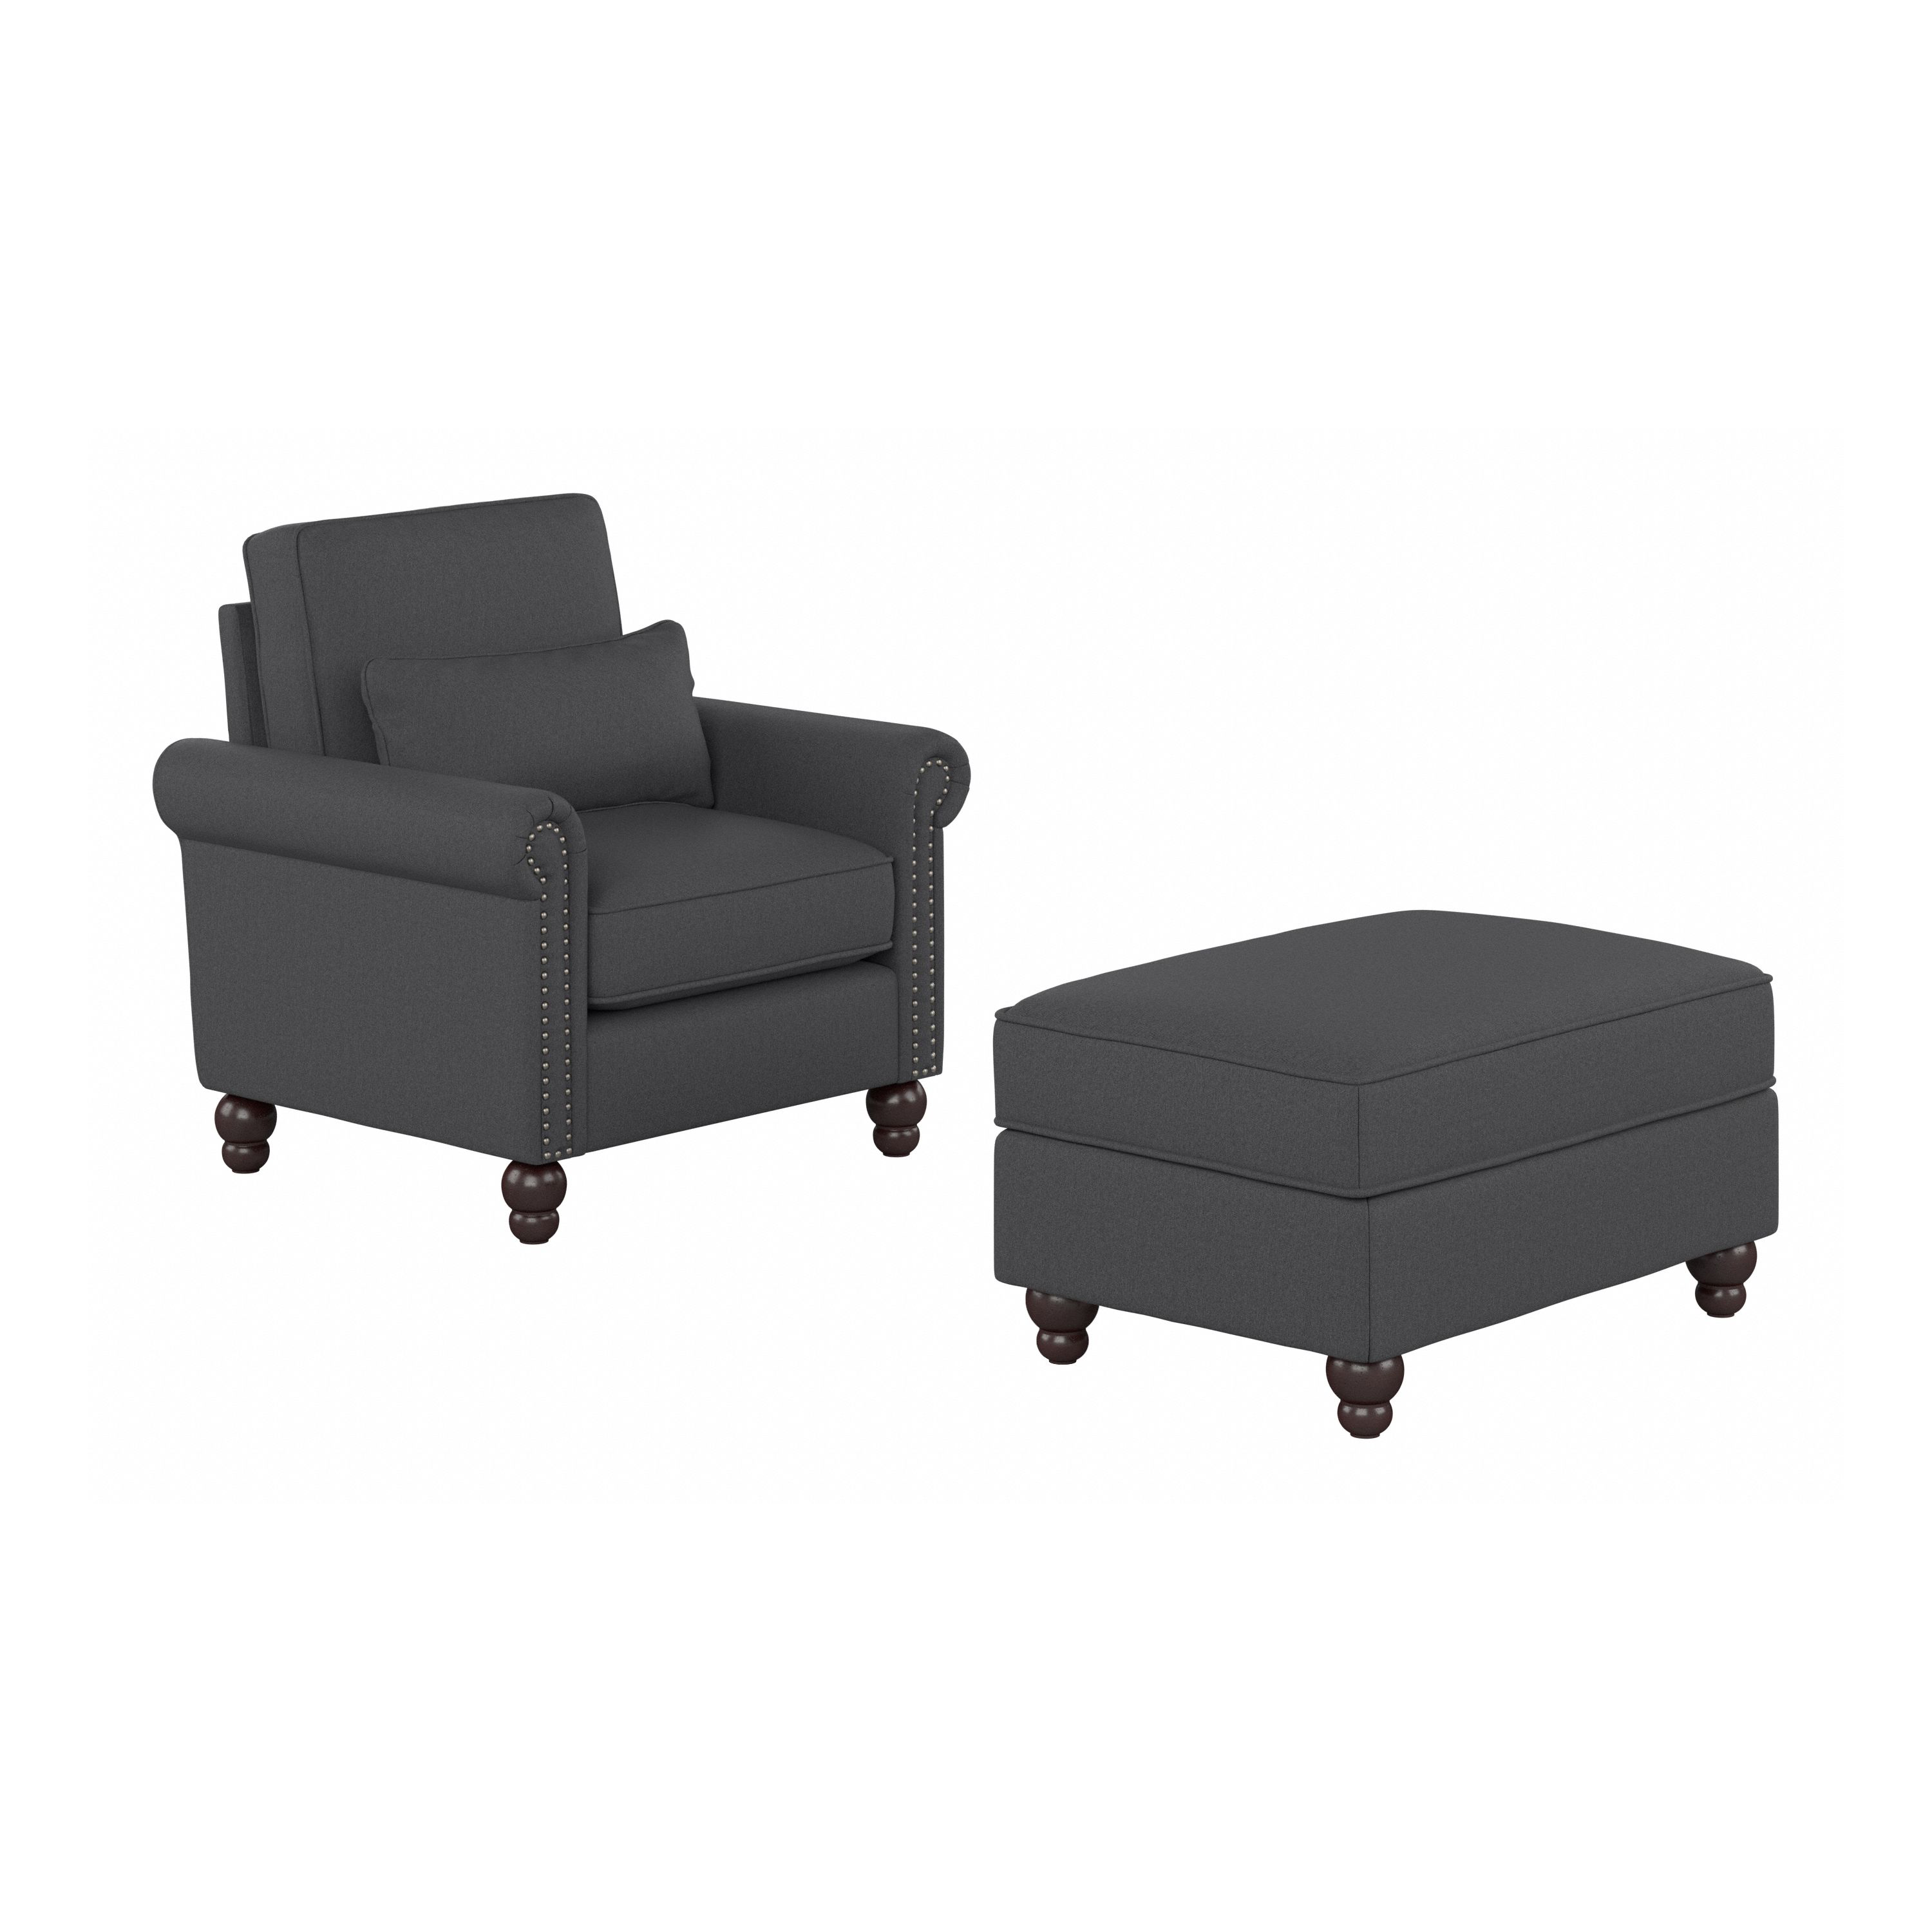 Shop Bush Furniture Coventry Accent Chair with Ottoman Set 02 CVN010CGH #color_charcoal gray herringbone fabr